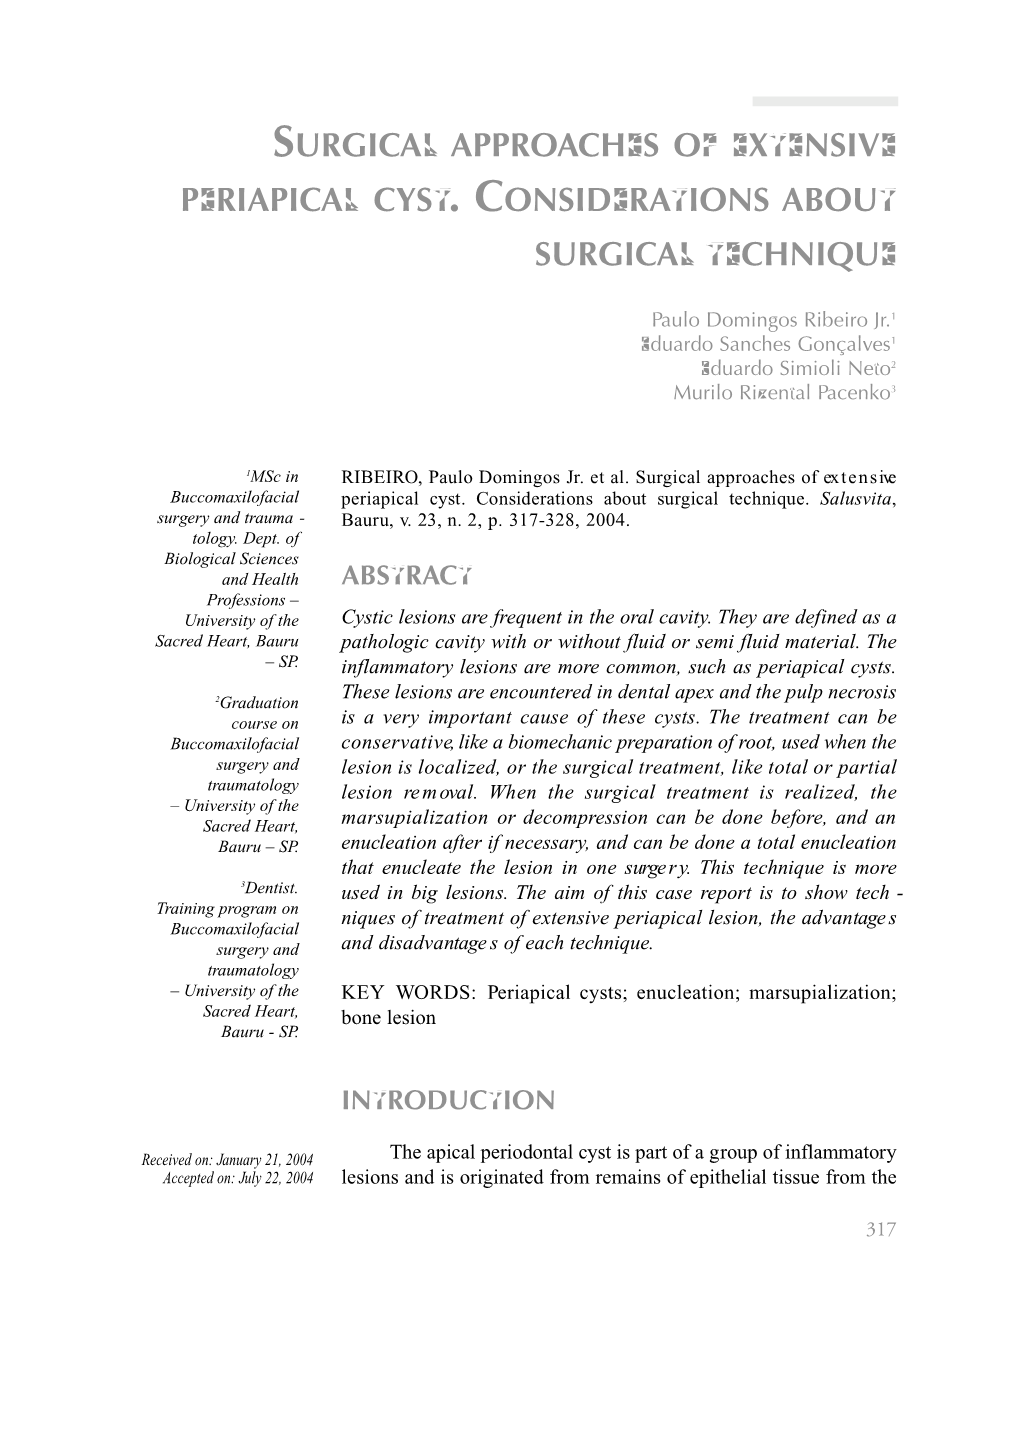 Surgical Approaches of Extensive Periapical Cyst